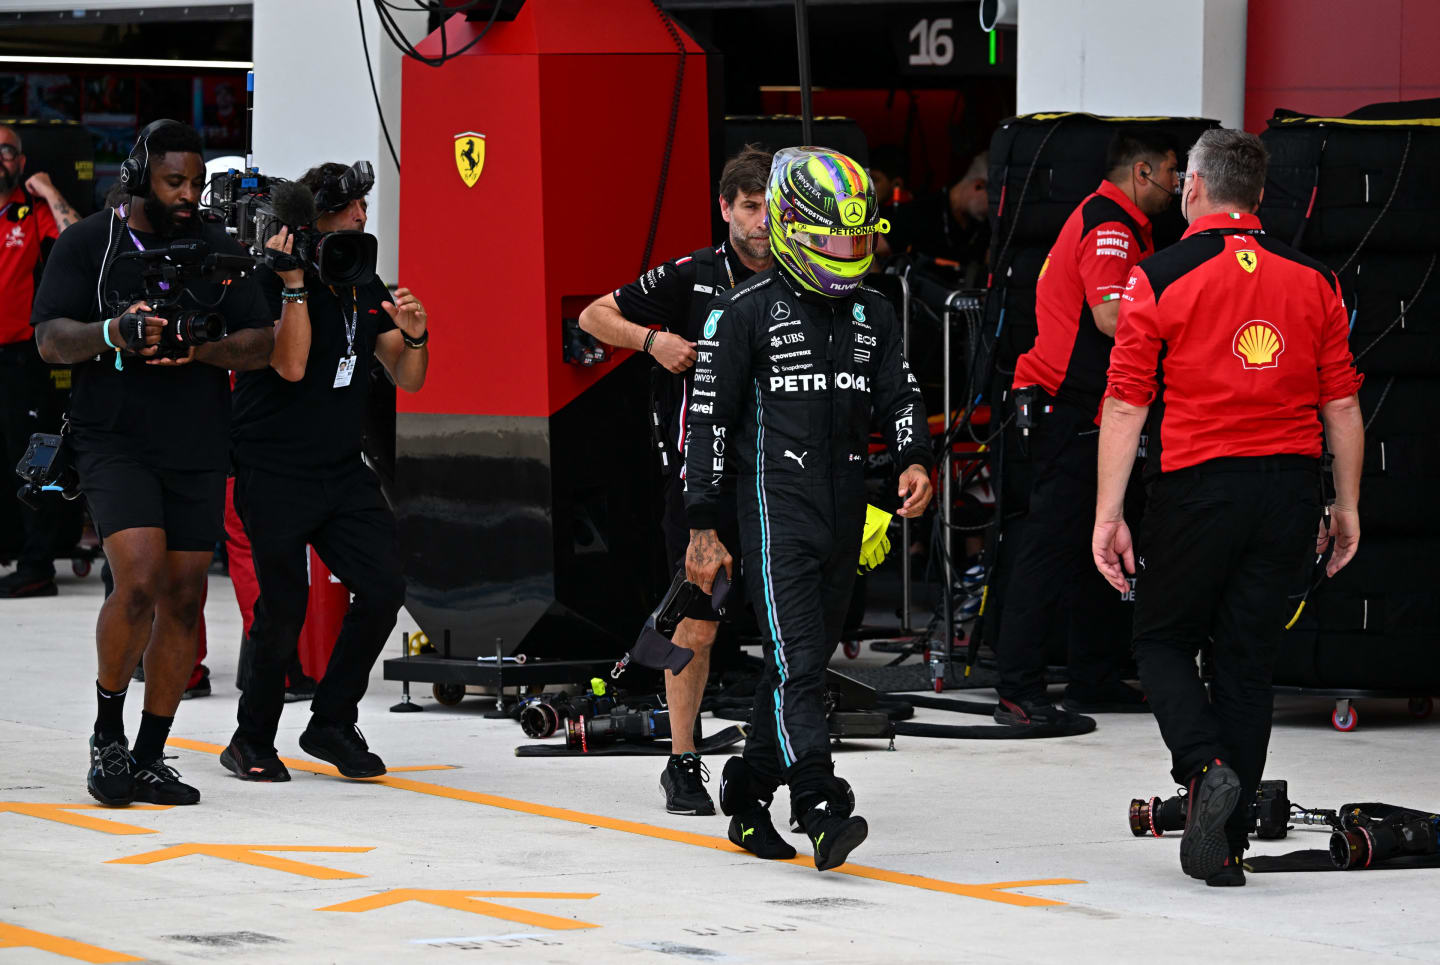 Mercedes' British driver Lewis Hamilton walk to a weigh in after the qualifying session for the 2023 Miami Formula One Grand Prix at the Miami International Autodrome in Miami Gardens, Florida, on May 6, 2023. (Photo by CHANDAN KHANNA / POOL / AFP) (Photo by CHANDAN KHANNA/POOL/AFP via Getty Images)